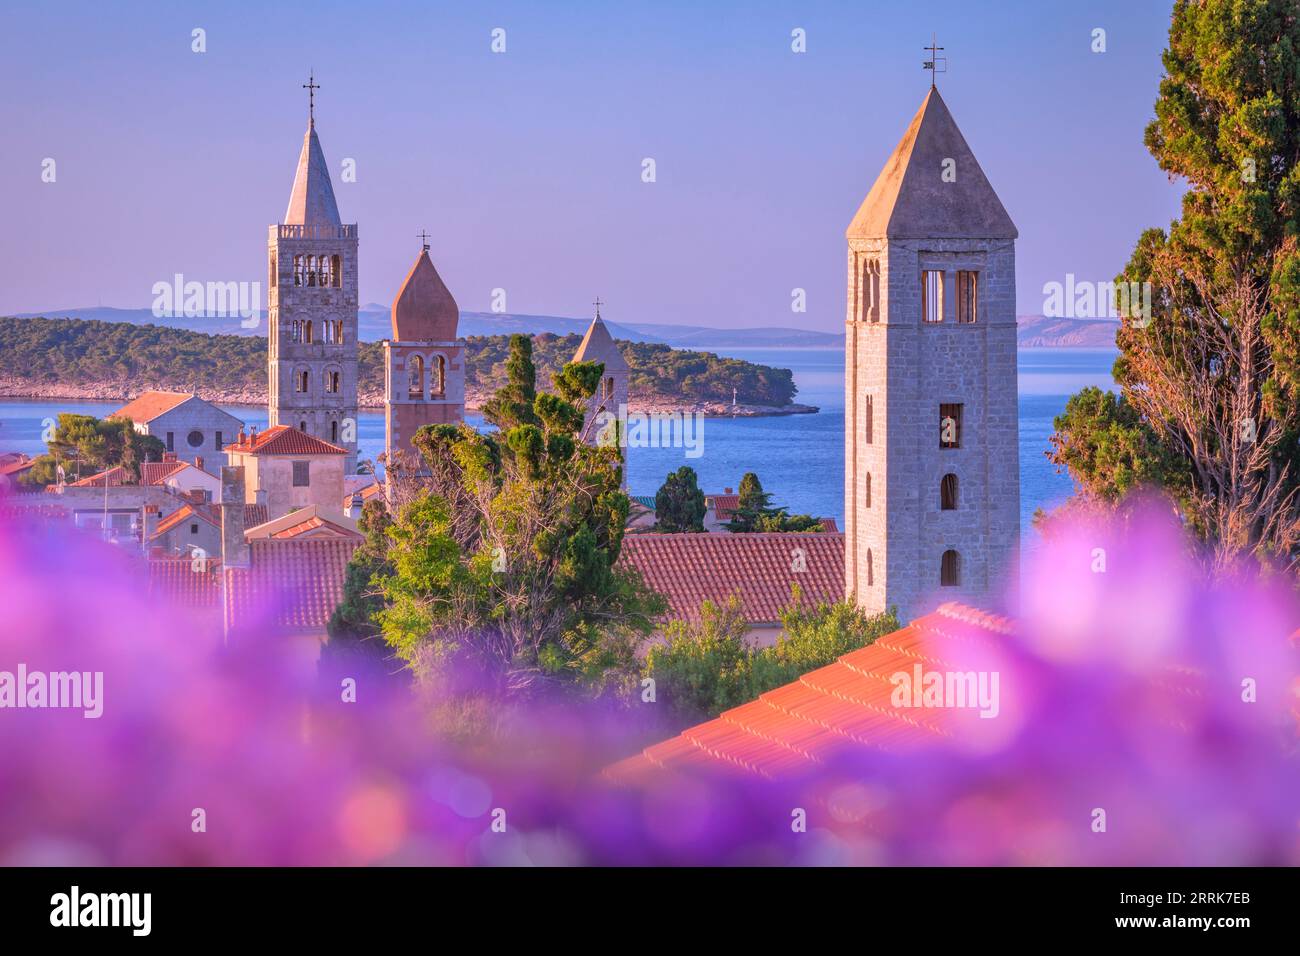 Europe, Croatia, Primorje-Gorski Kotar County, island of Rab, view of the old town of Rab with the characteristic bell towers Stock Photo